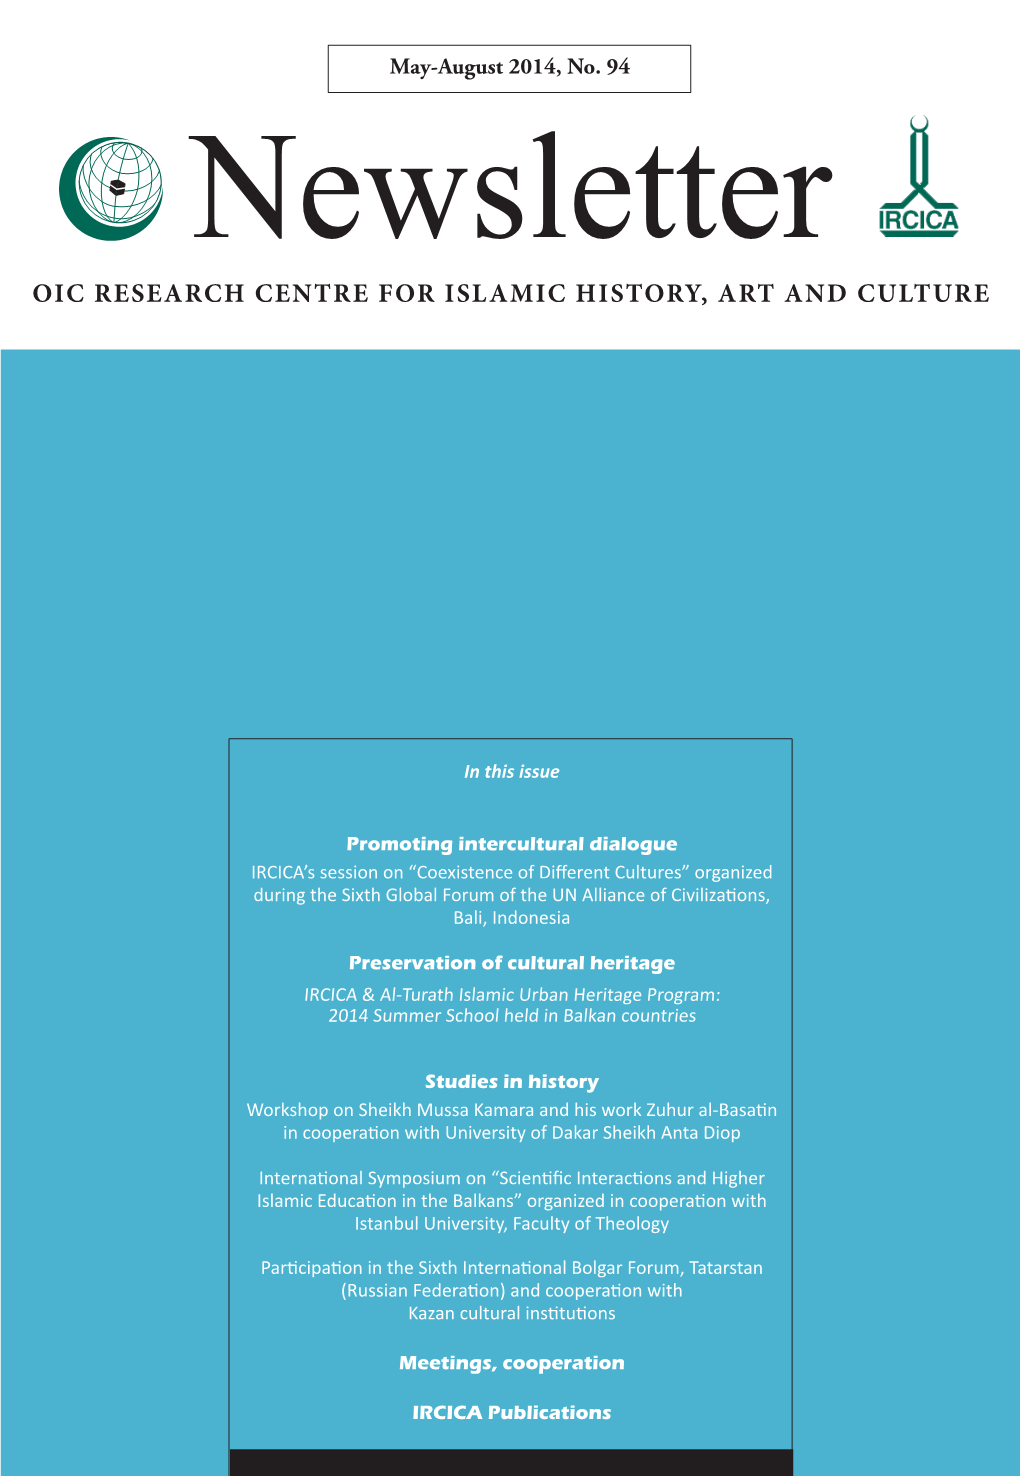 Oic Research Centre for Islamic History, Art and Culture